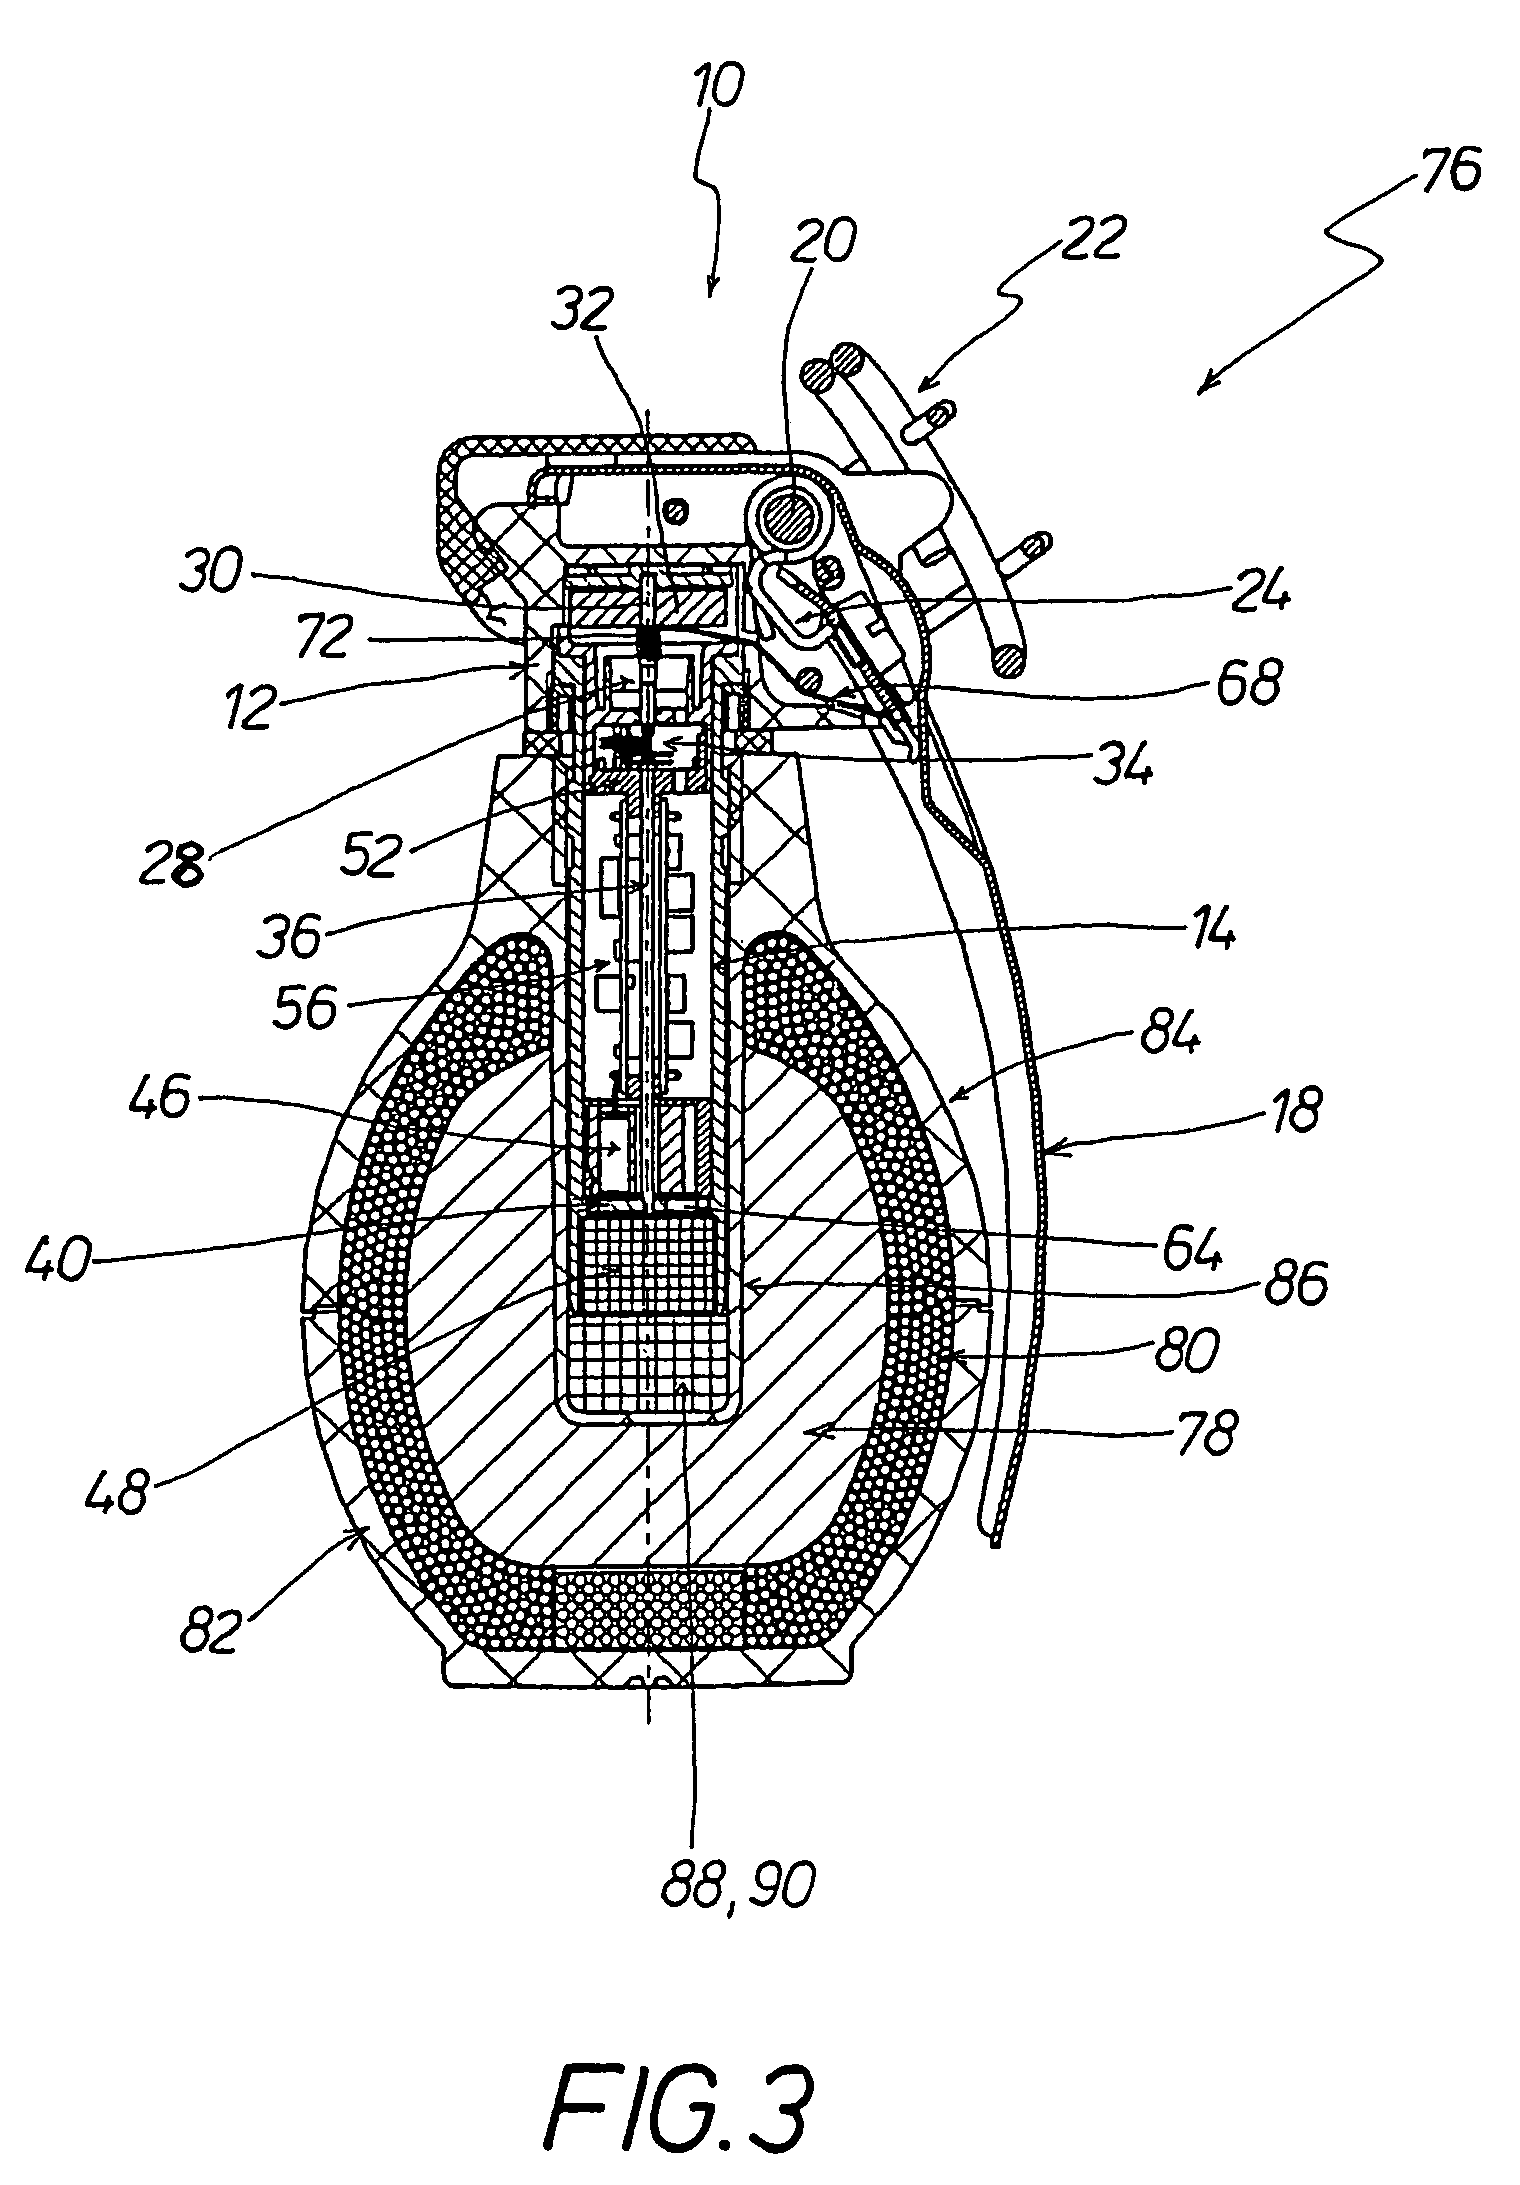 Mechano-electrical fuse for a hand grenade